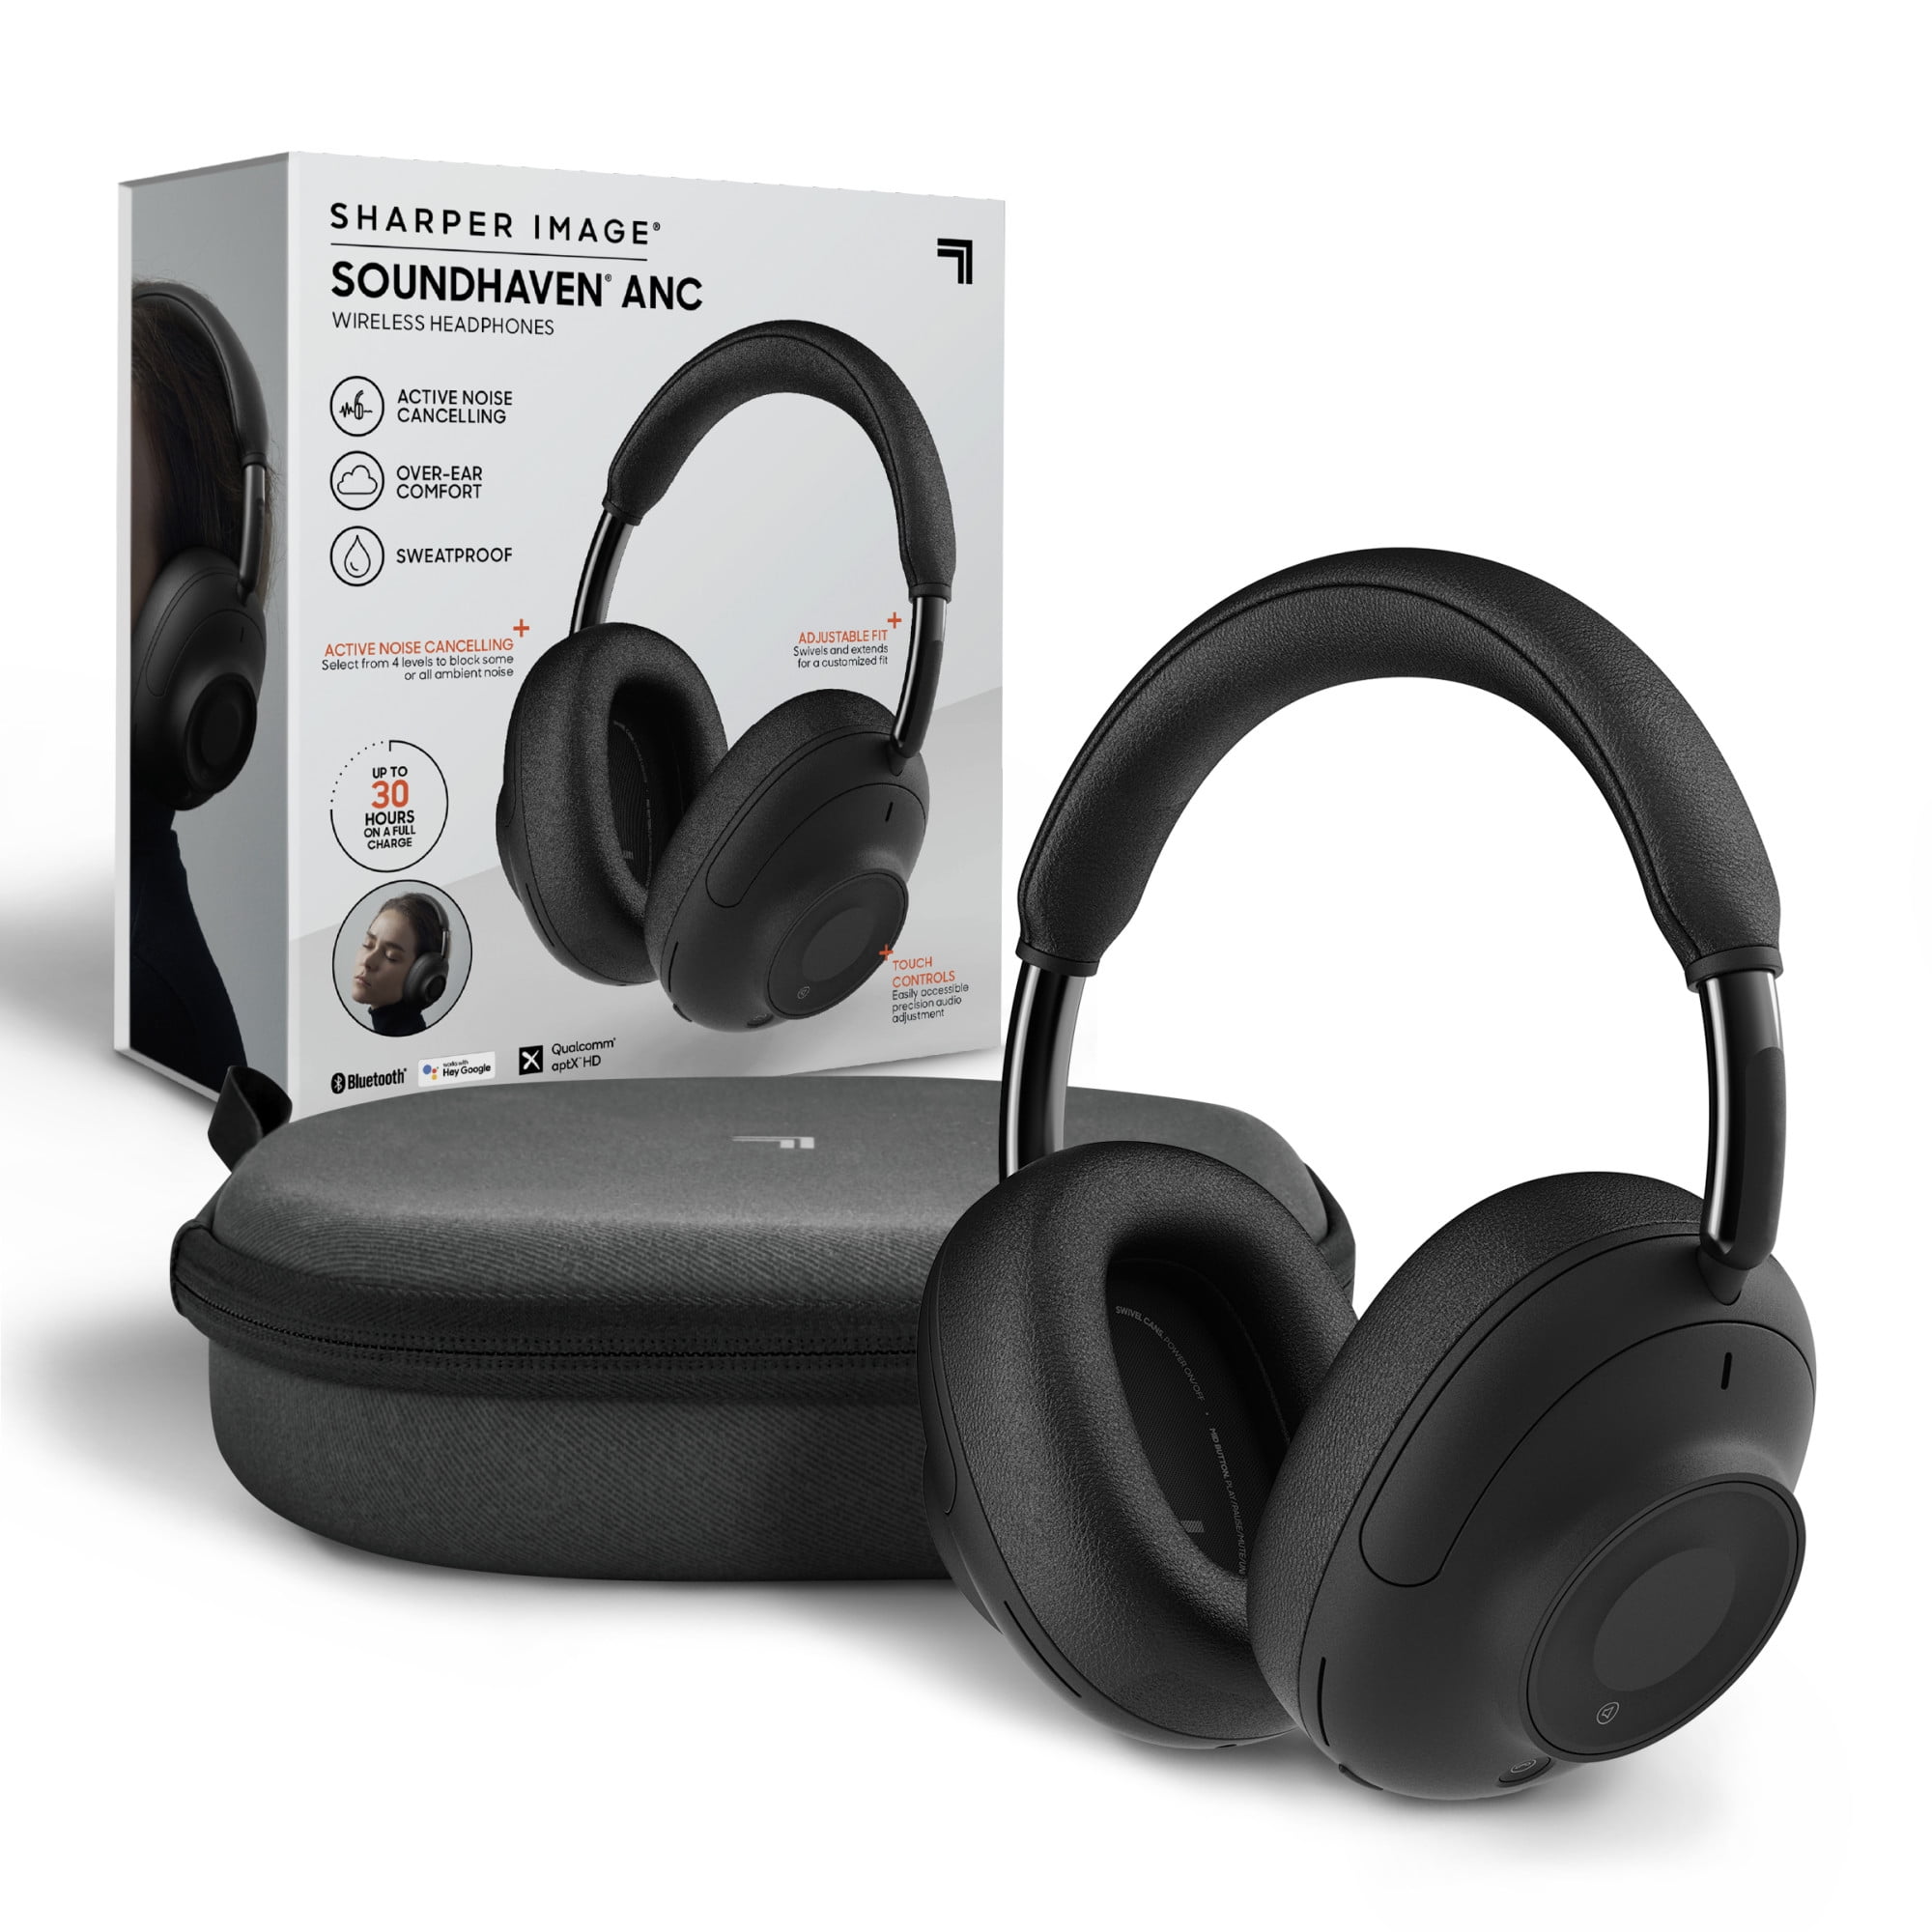 Sharper Image SoundHaven Wireless Over-Ear Bluetooth Headphones, Active Noise Canceling, 30-Hour Playtime, IPX4 Sweatproof, Music & Call Touch Controls, Connect to 2 Devices, Premium Audio Drivers